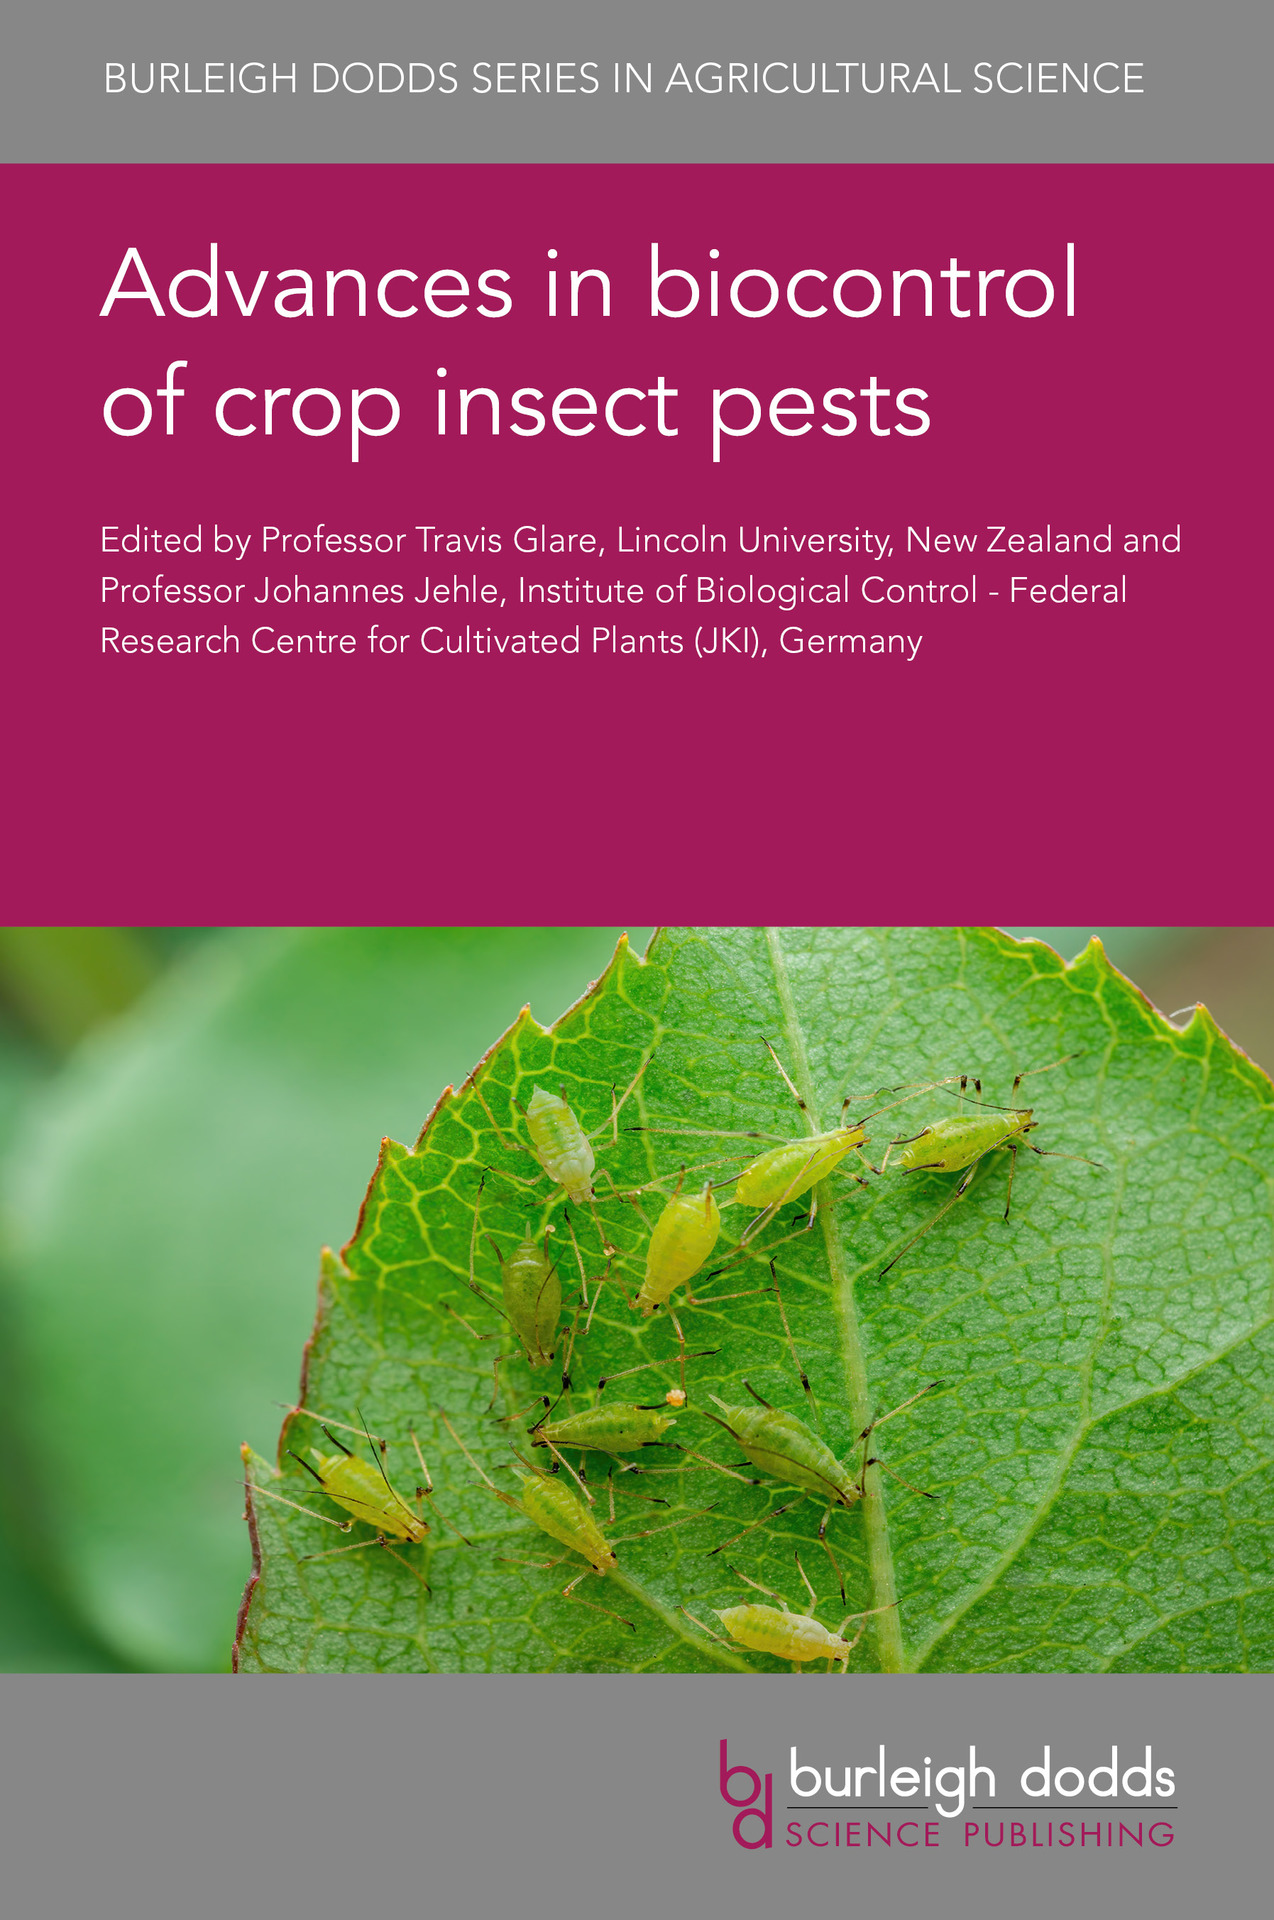 Advances in biocontrol of crop insect pests